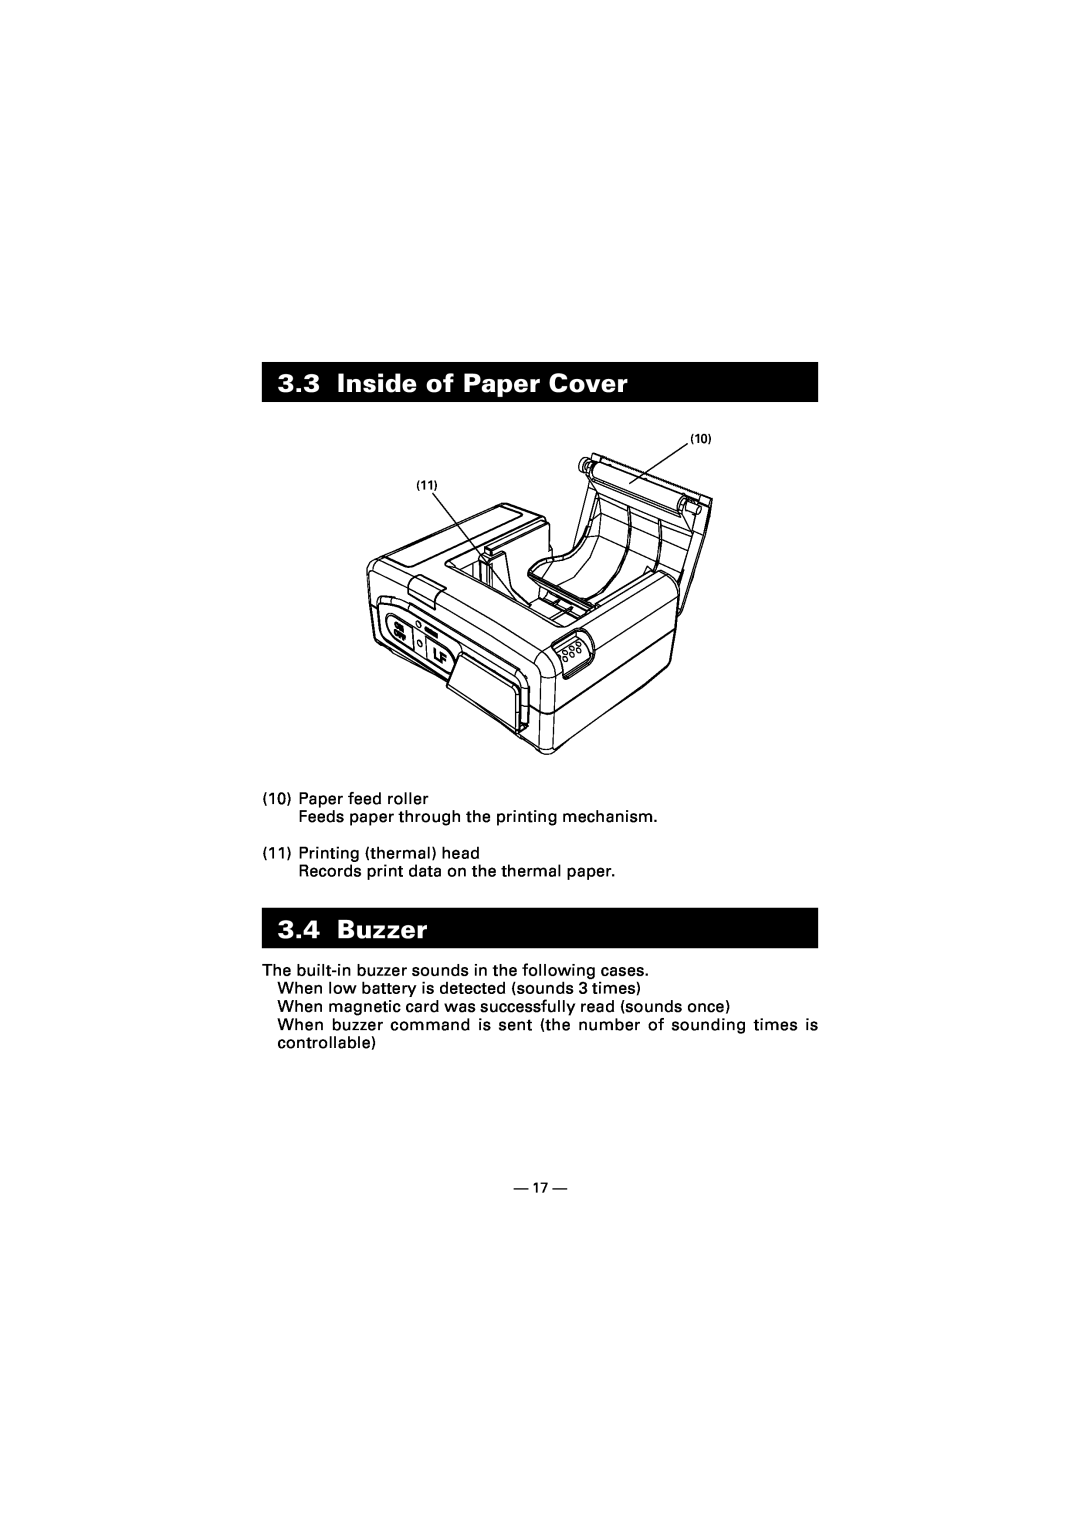 Citizen Systems CMP-10 manual Inside of Paper Cover, Buzzer, Paper feed roller Feeds paper through the printing mechanism 